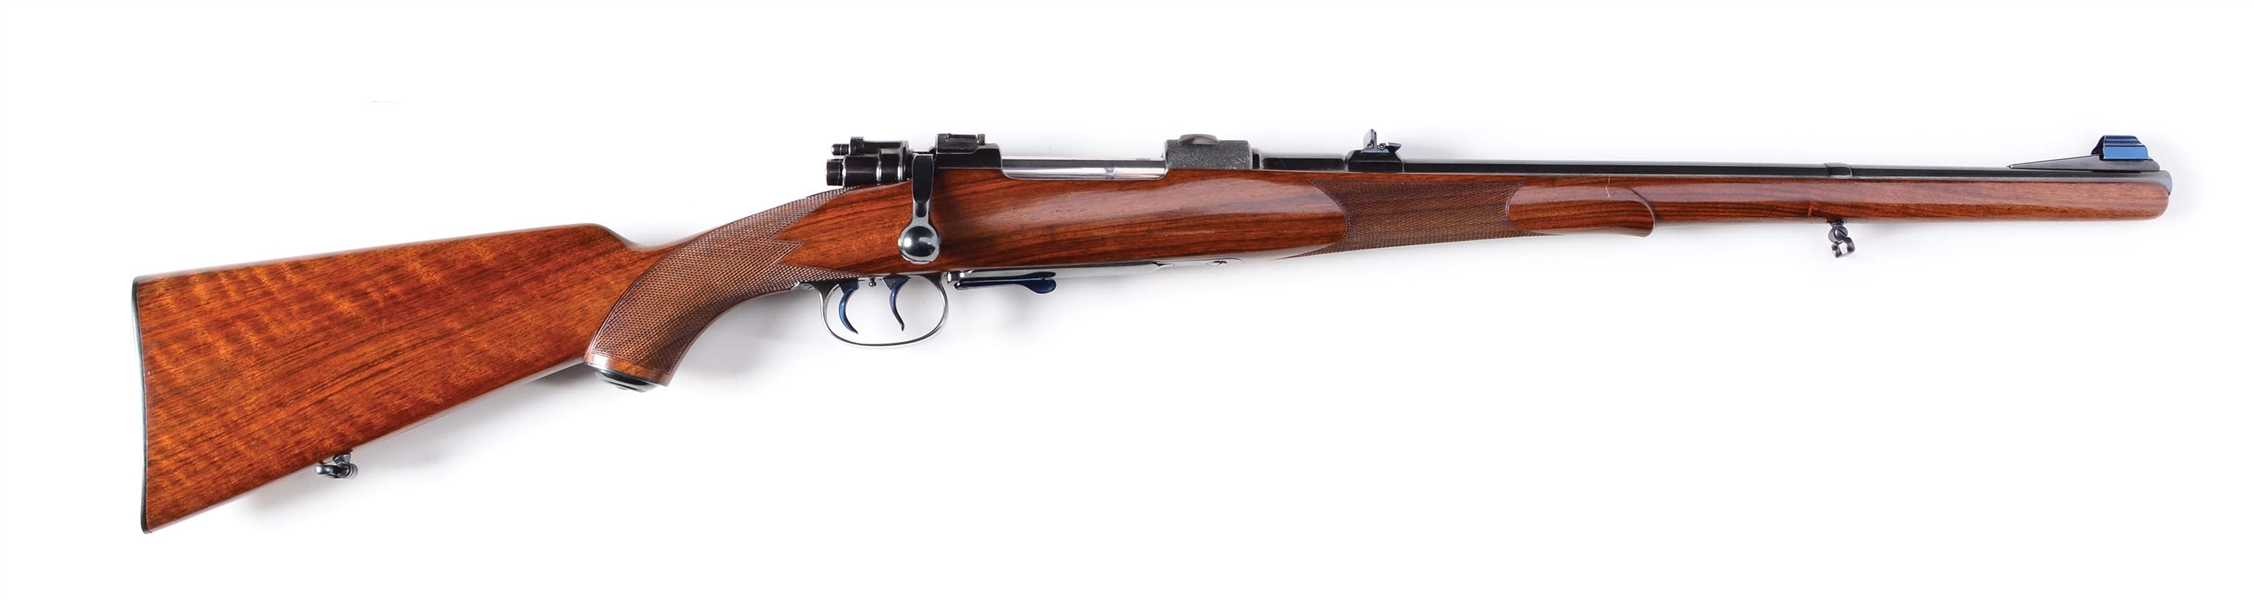 (C) COMMERCIAL MAUSER TYPE S PATTERN 210 BOLT ACTION CARBINE, NICELY RESTORED, AND WITH LEUPOLD SCOPE